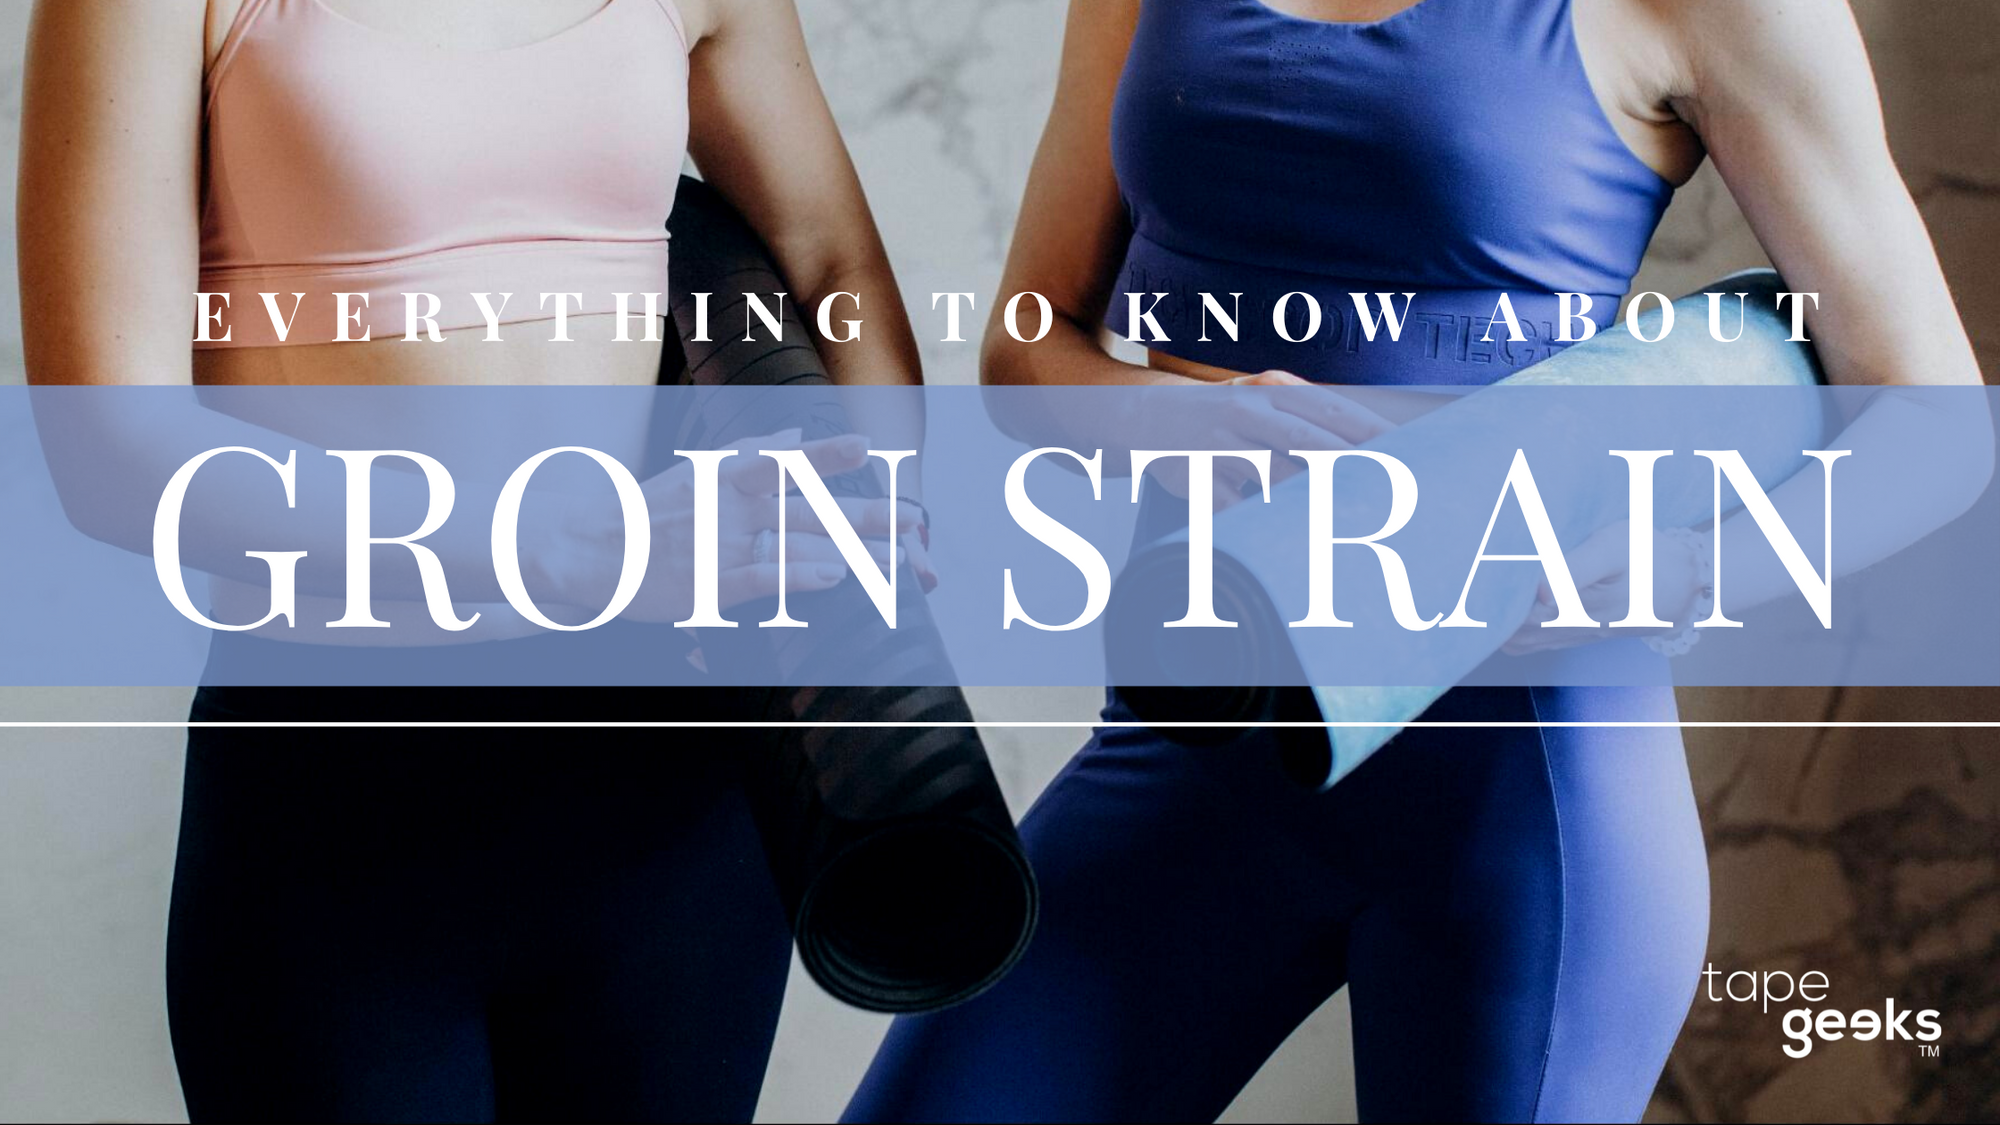 WHAT IS THE BEST TREATMENT FOR A STRAINED GROIN?